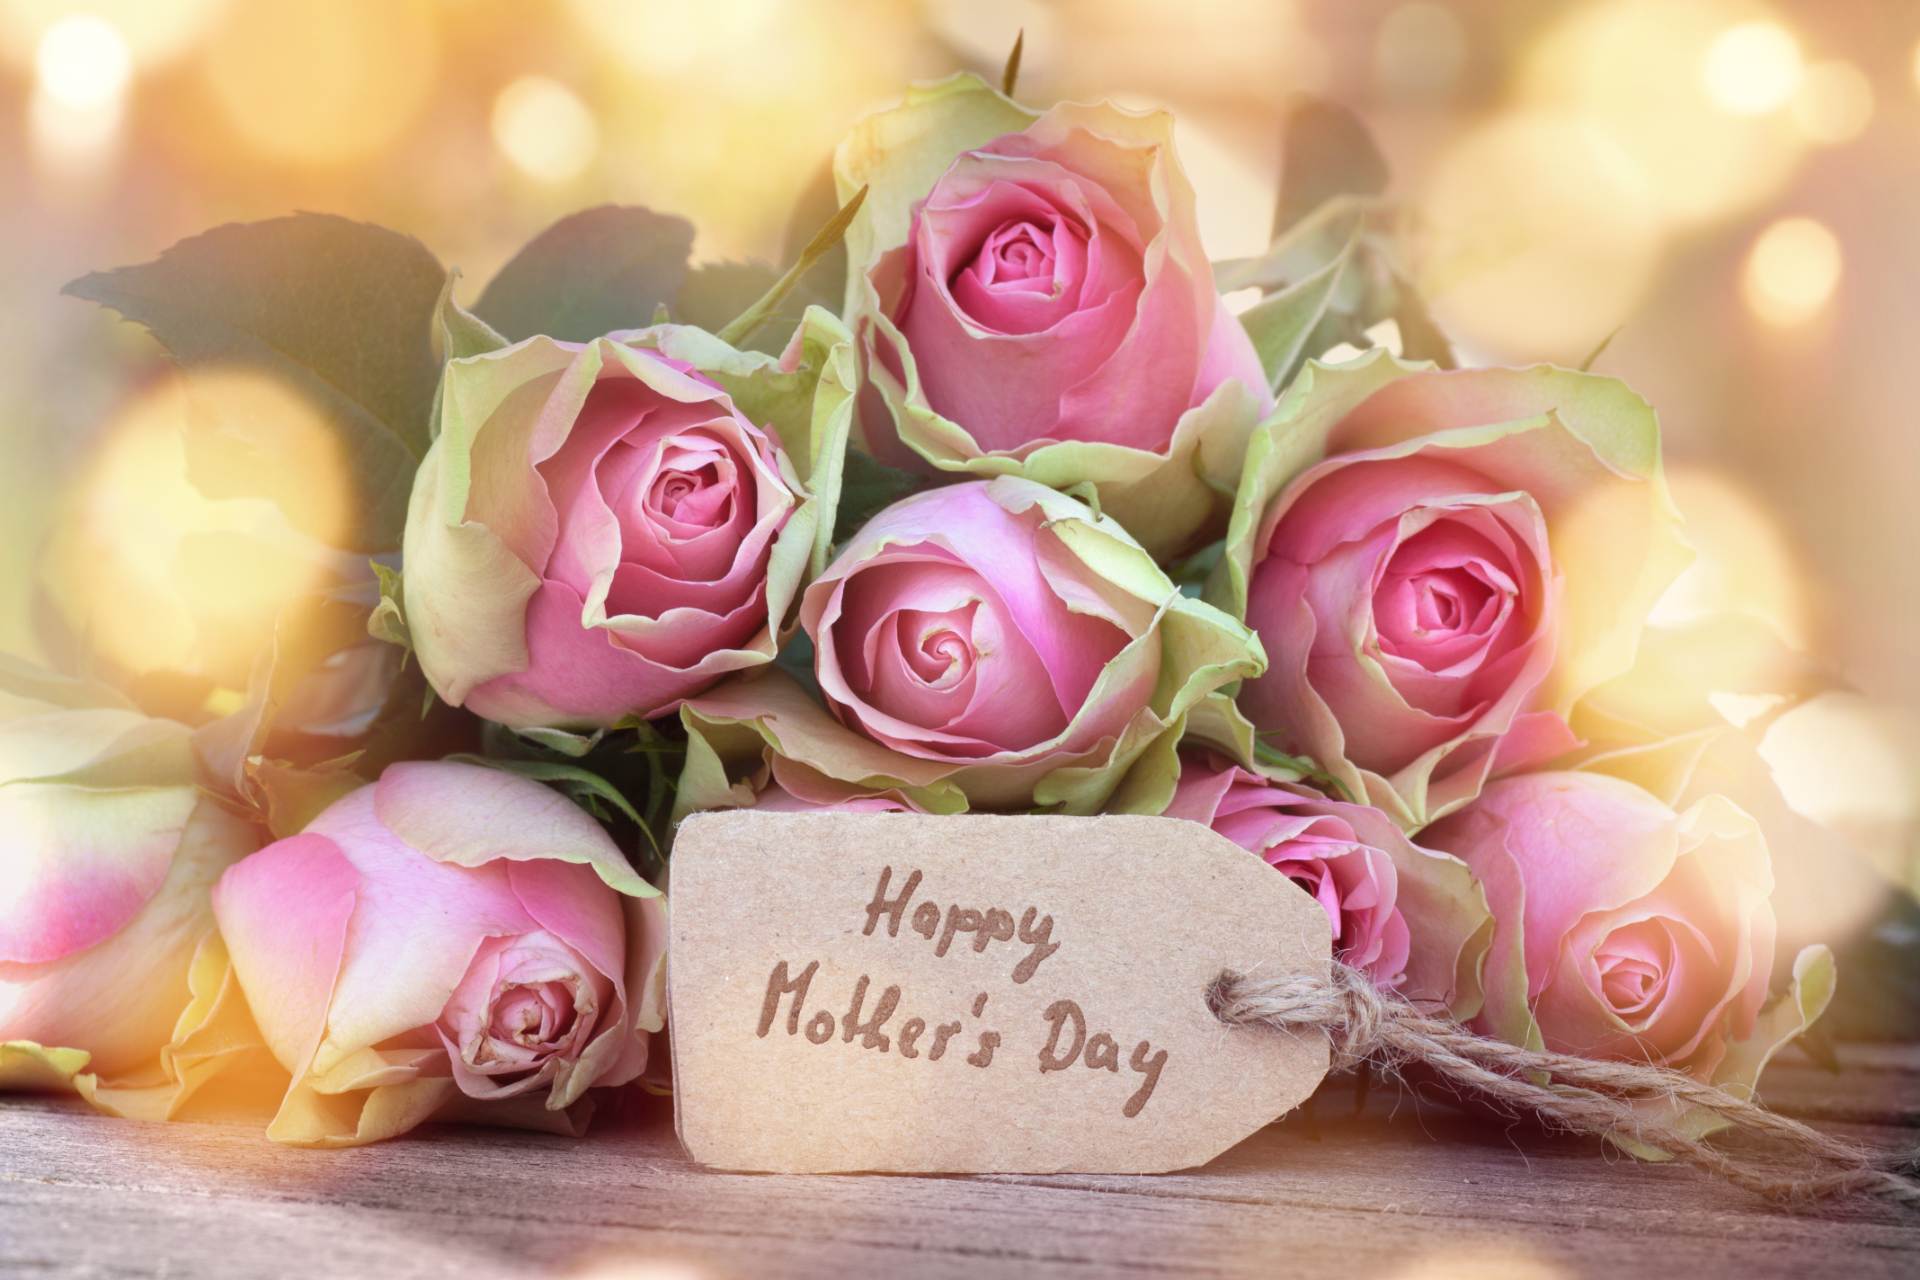 Mother’s Day: Celebrating Caregivers - A Tribute to Unsung Heroes